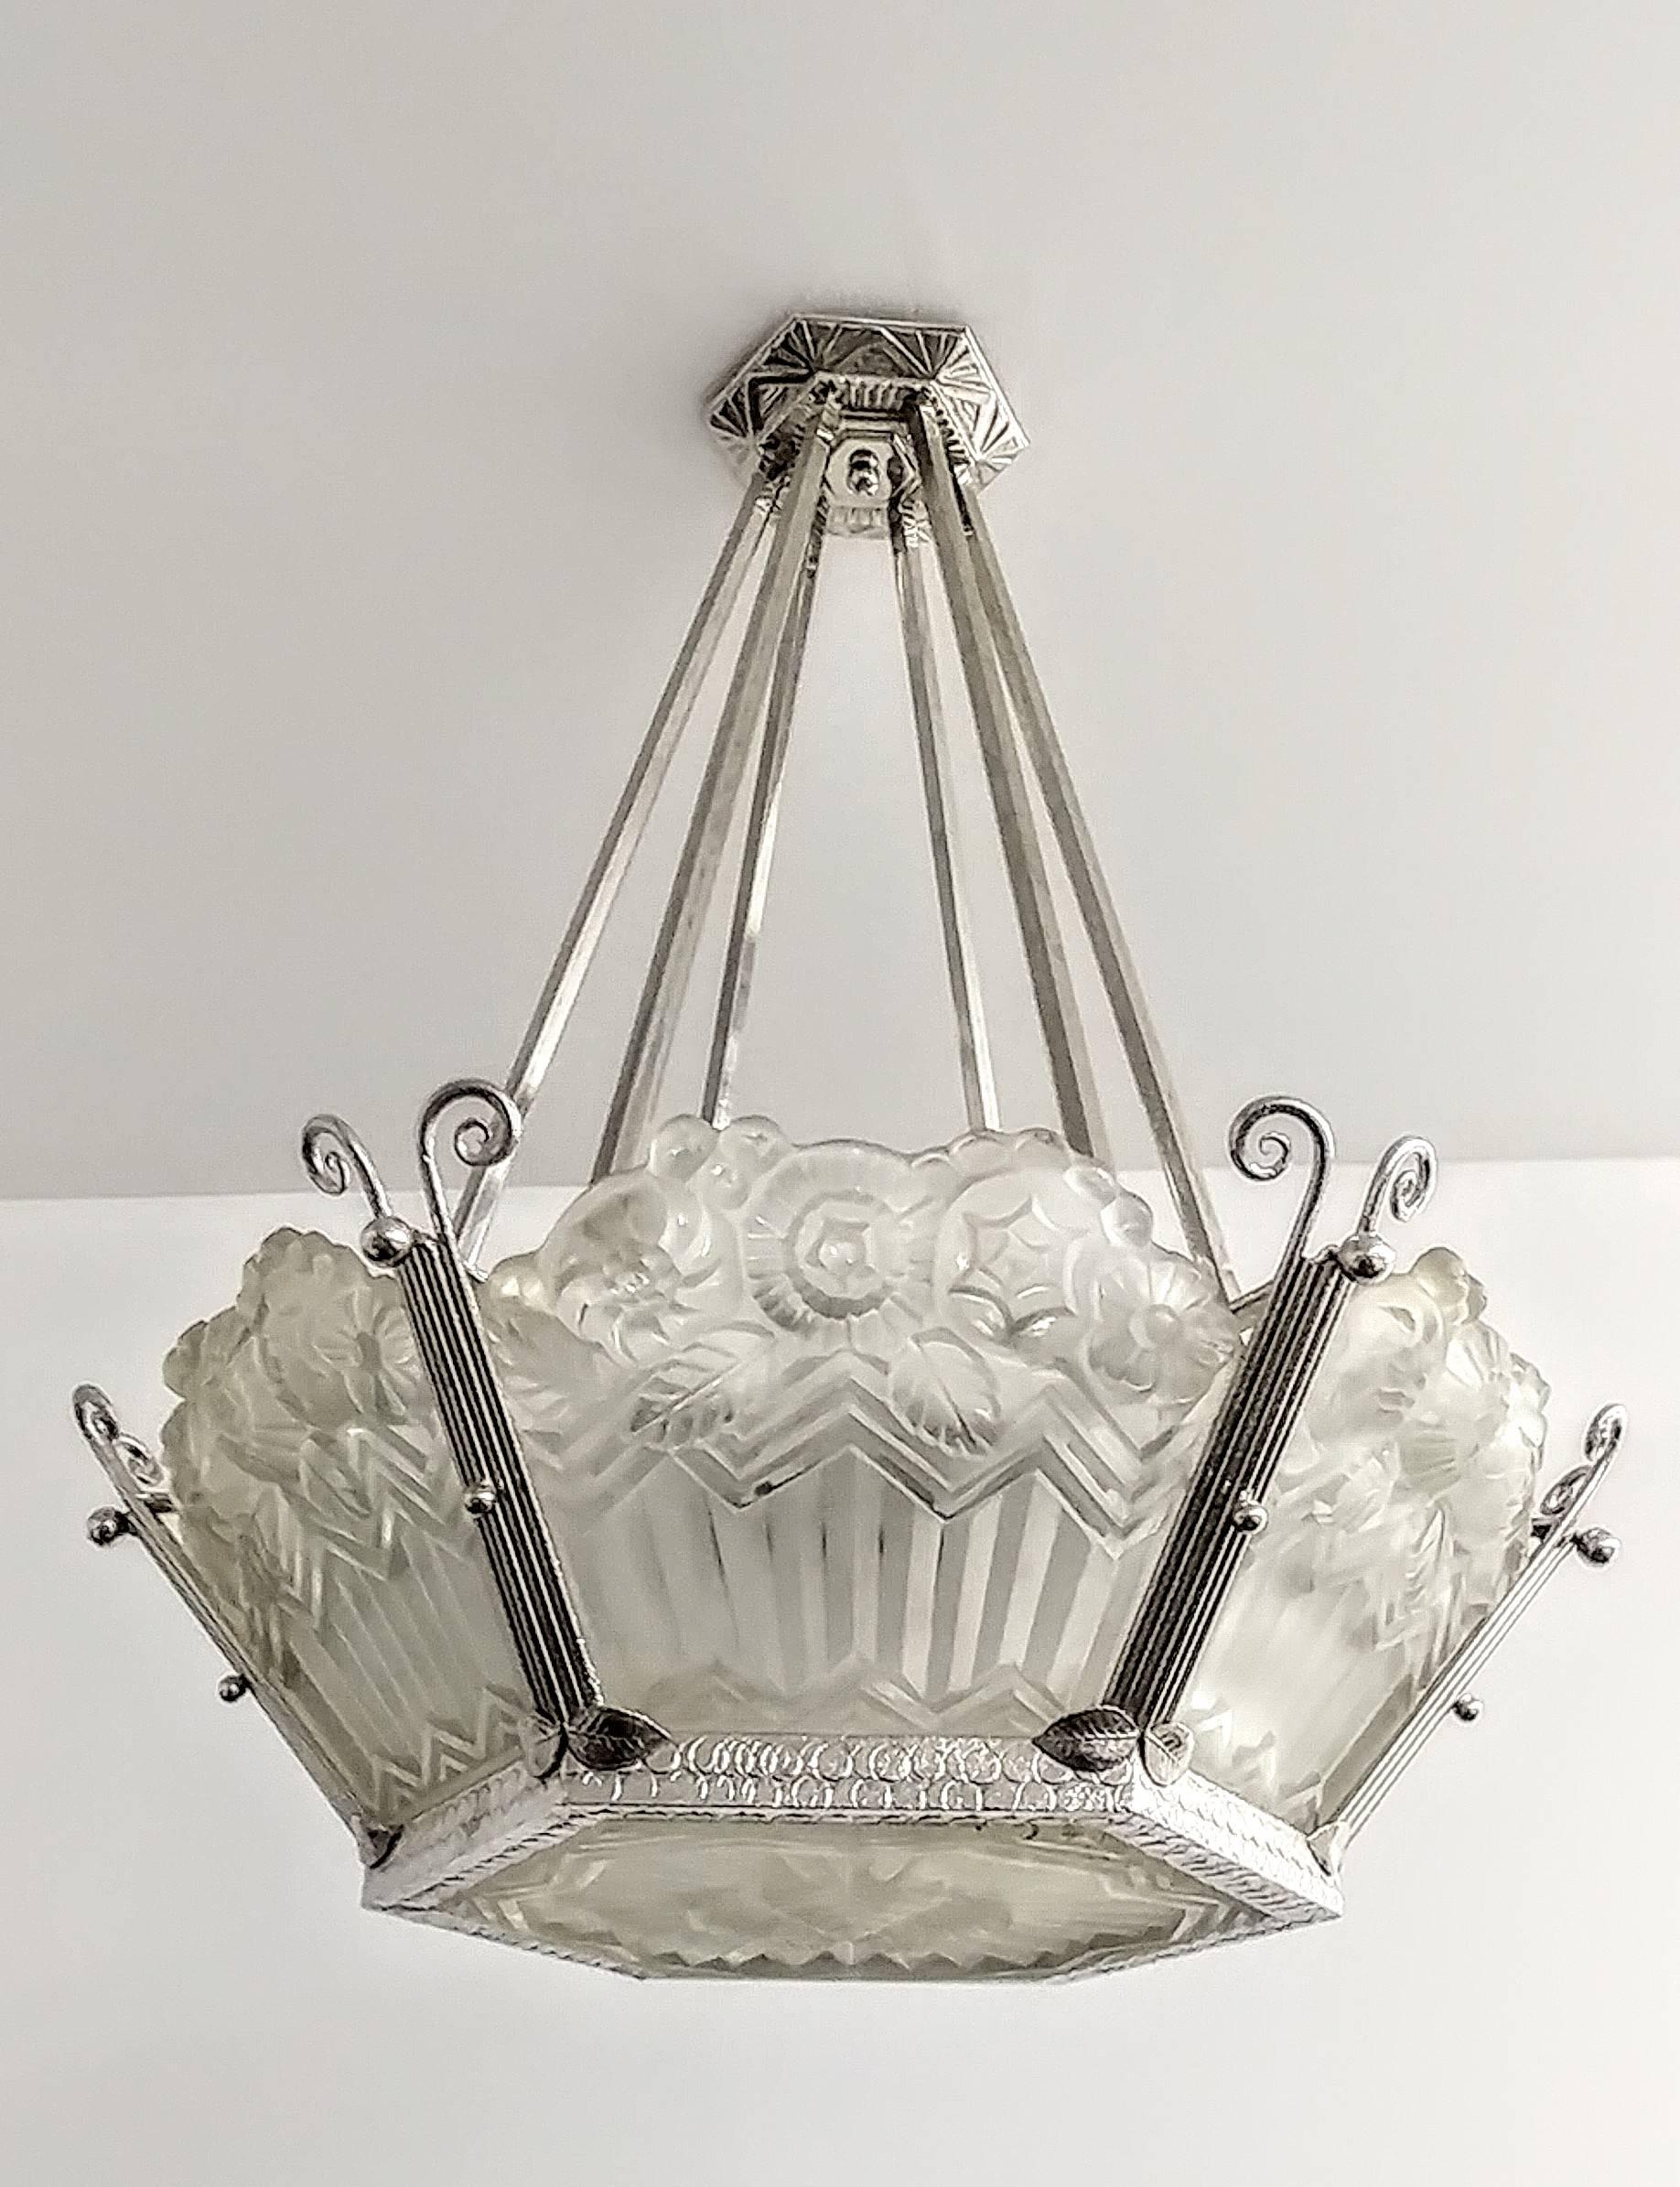 A French Art Deco chandelier by Jean Noverdy. Six shades with matching center coupe in clear frosted glass with intricate flowers with geometric motif details. Each shade marked Noverdy France. Supported by a nickeled wrought iron frame. Chandelier